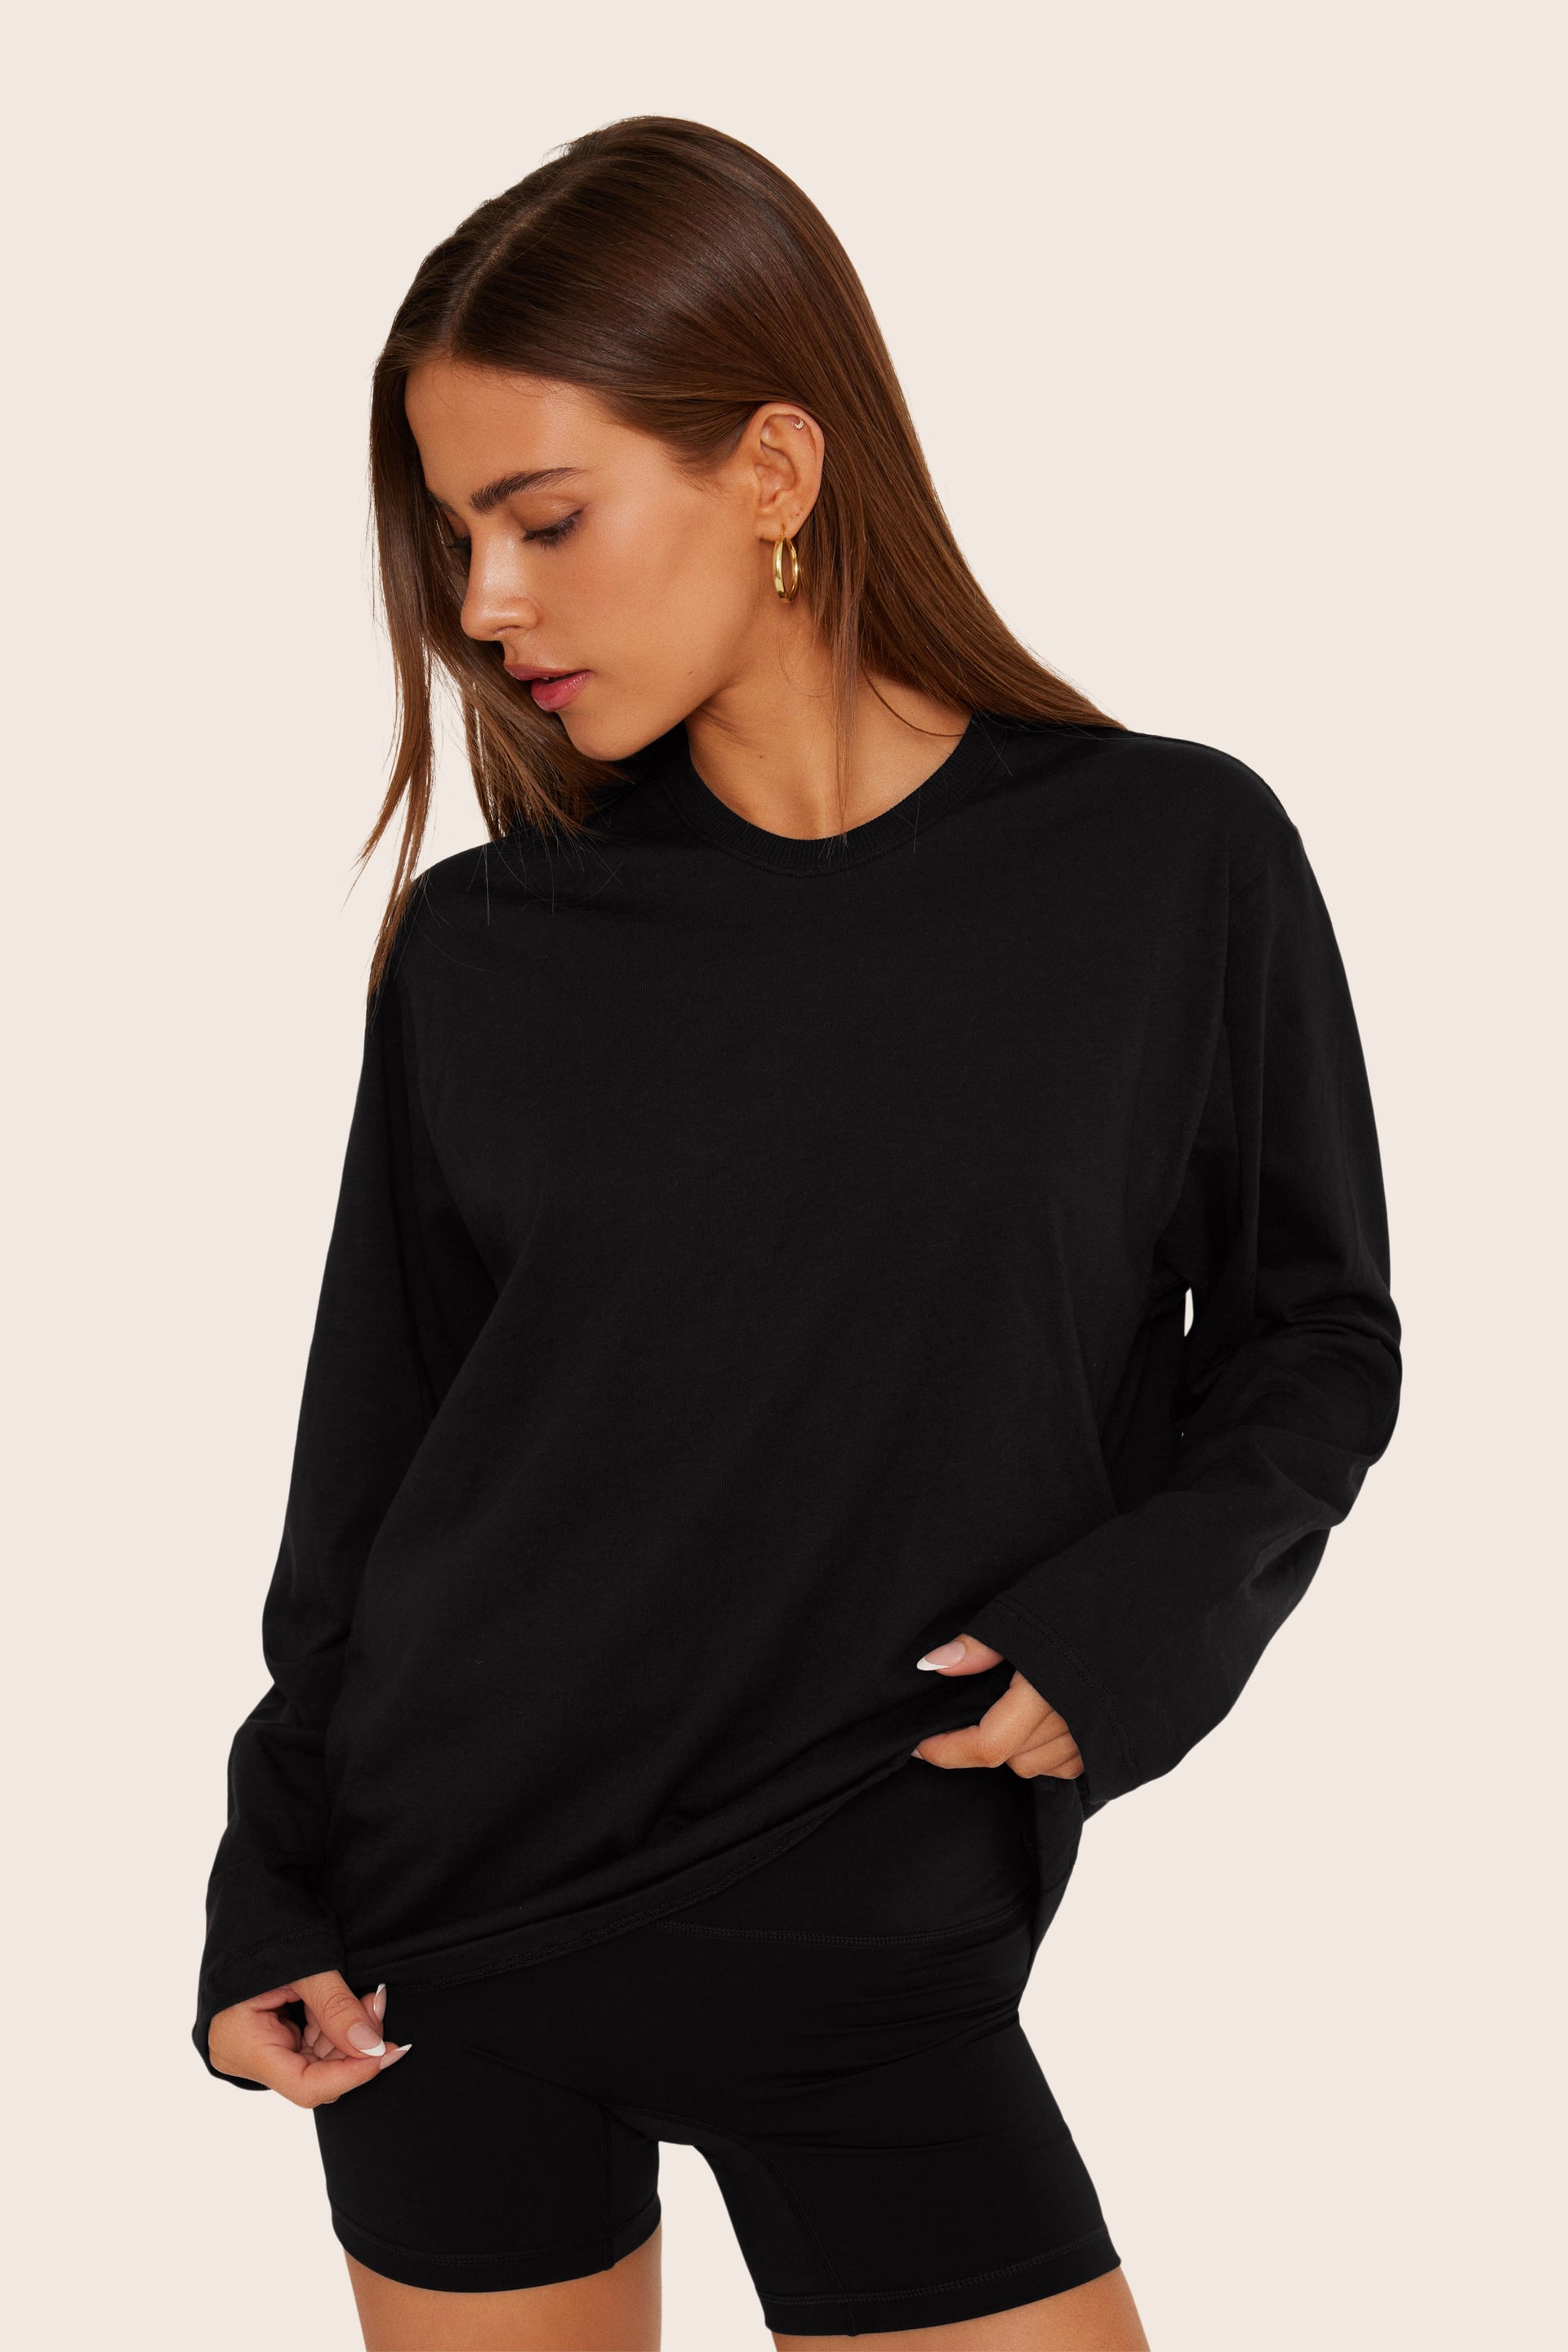 SET™ CLASSIC COTTON DAILY LONG SLEEVE IN ONYX